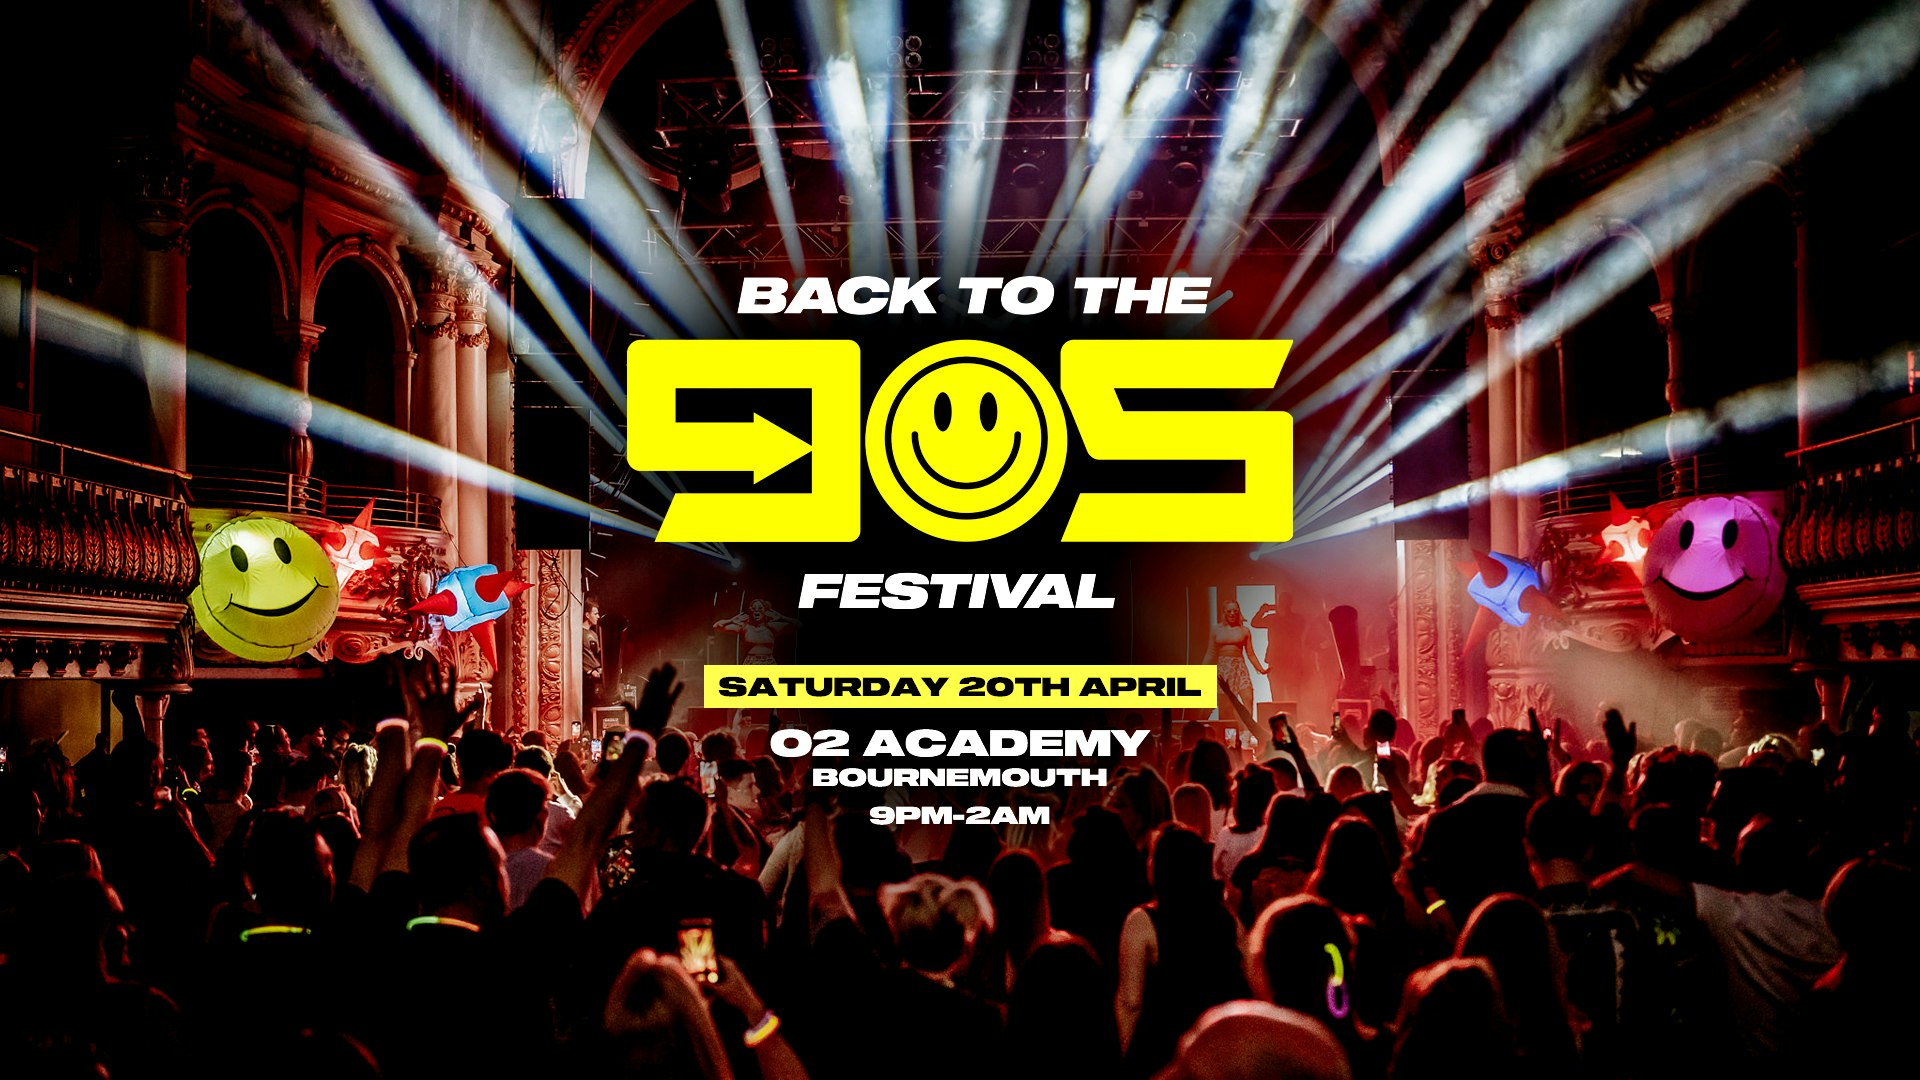 Back To The 90s Festival – Saturday 20th April – O2 Academy